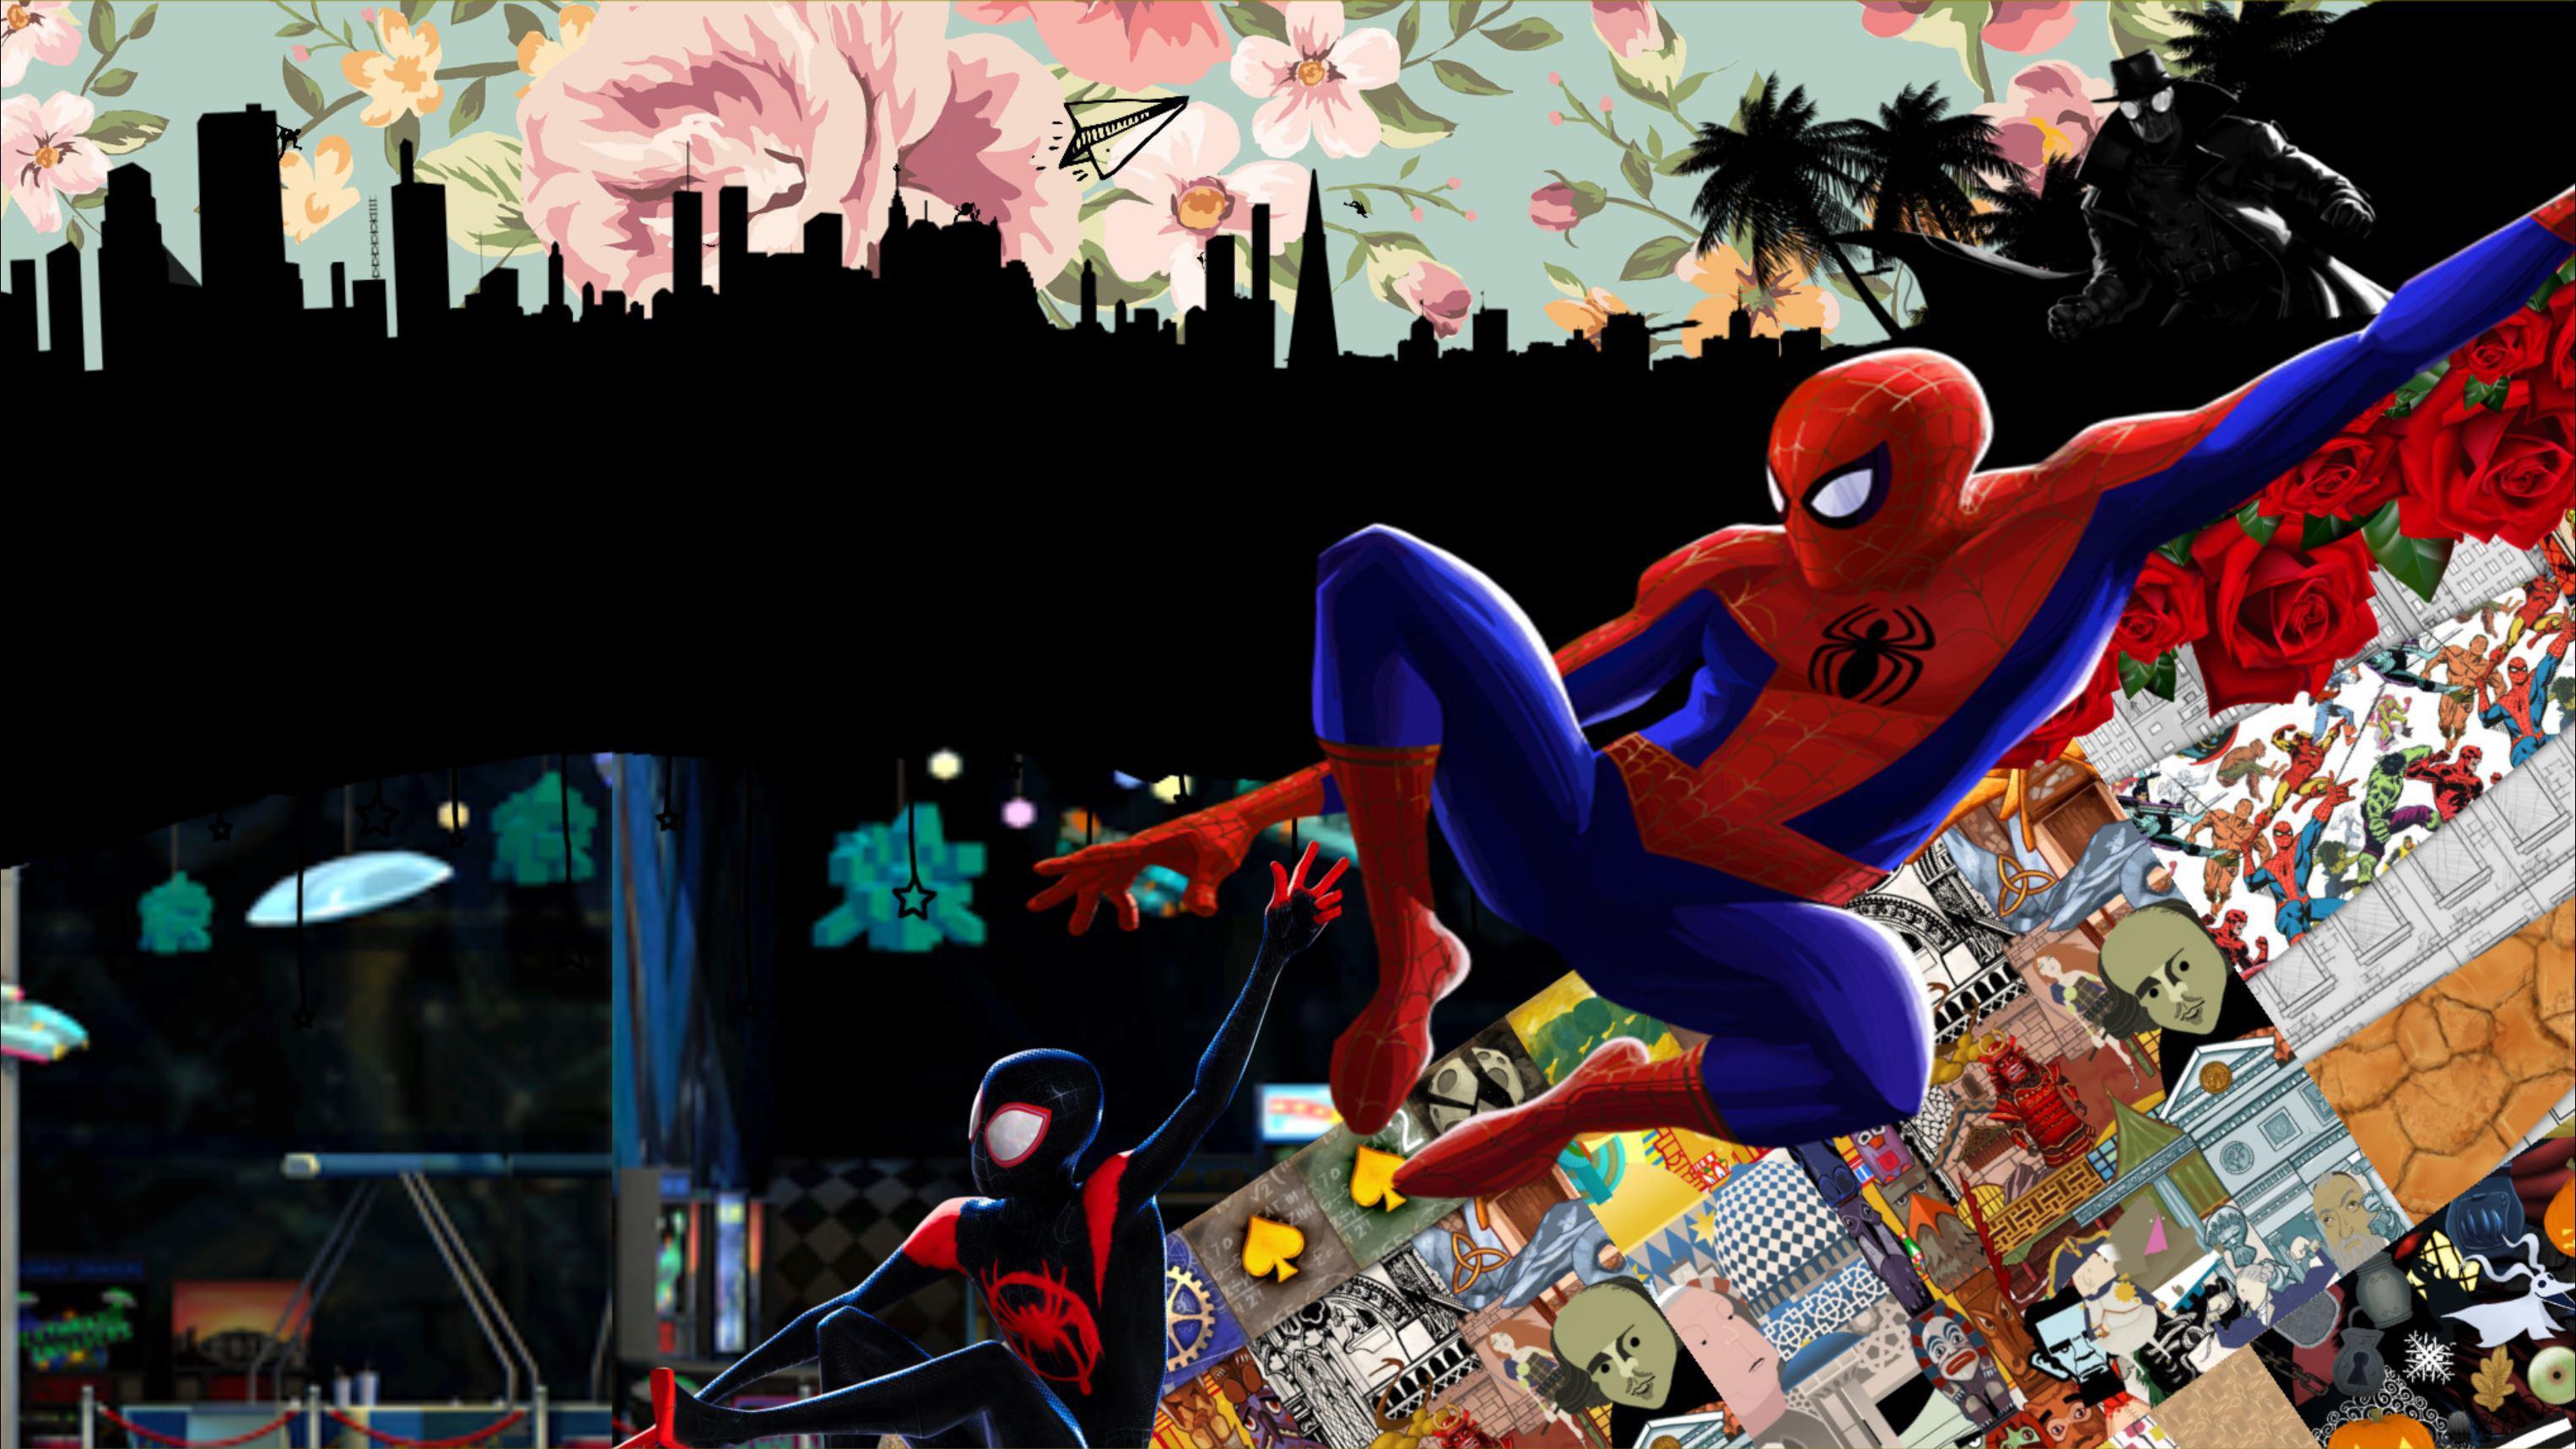 Here S A Into The Spider Verse Wallpaper I Made It Looks Way